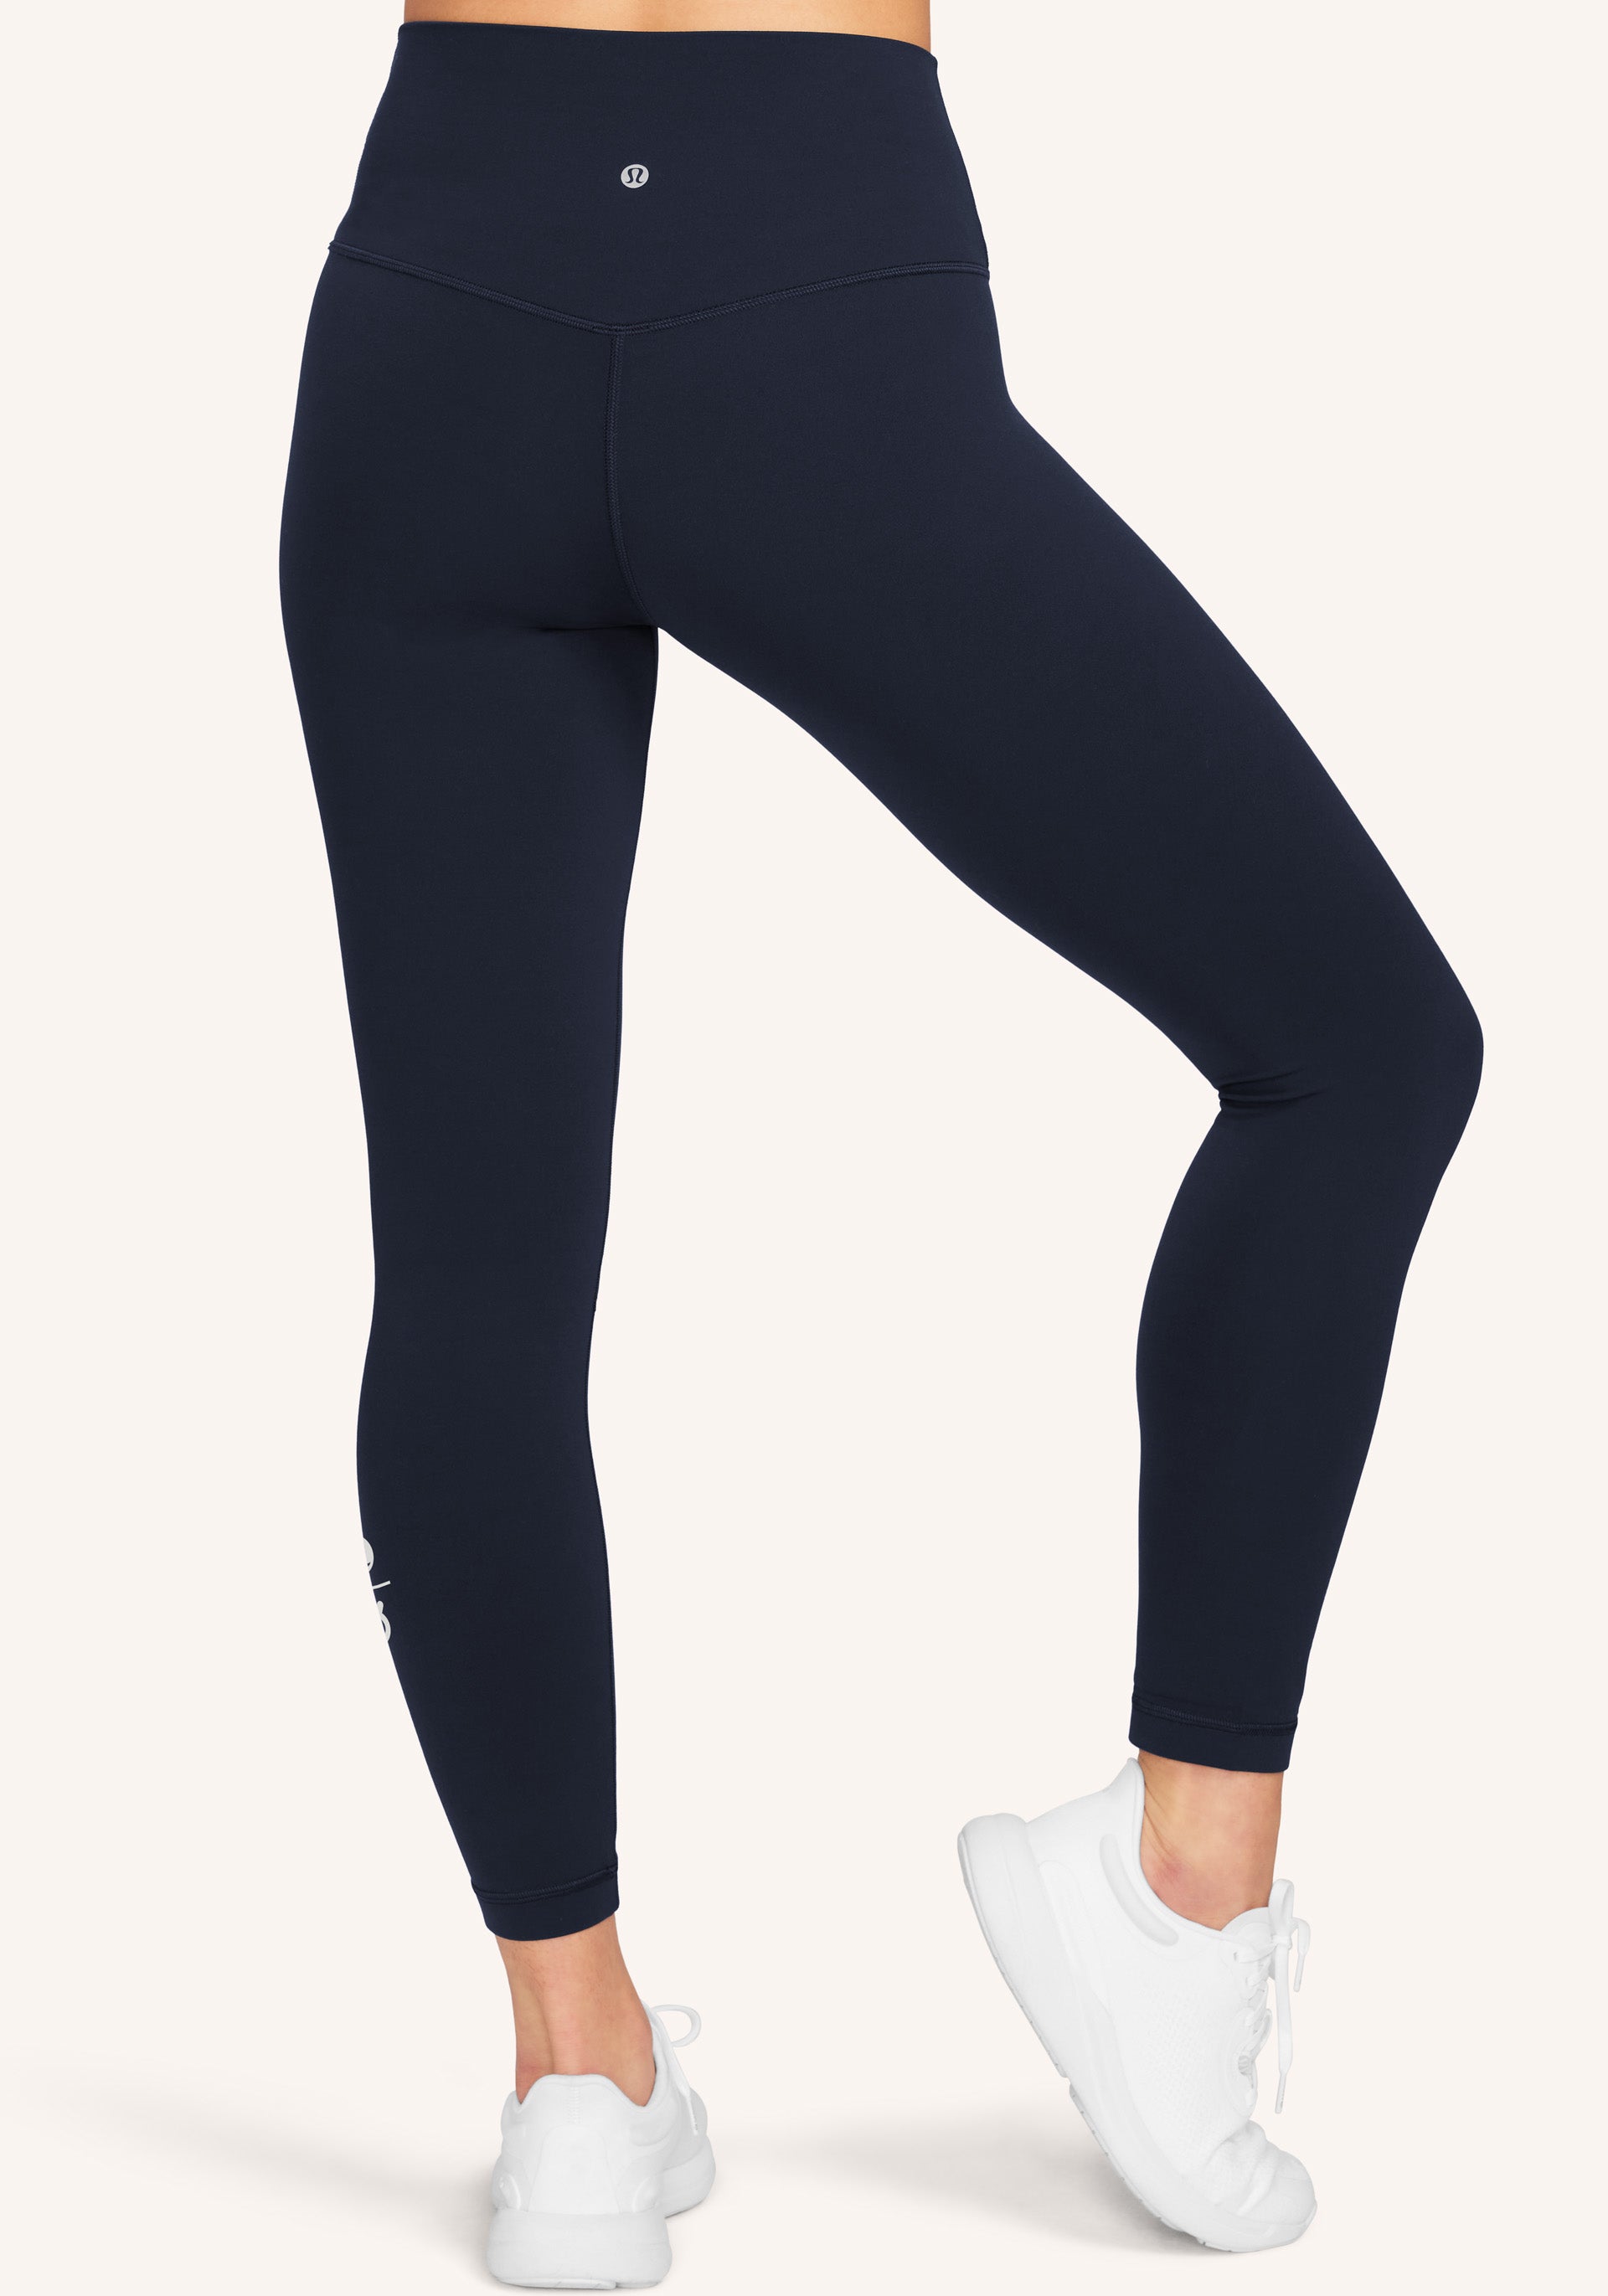 NWT Lululemon Align High-Rise Pant with Pockets 25 TRUE NAVY / Size 10